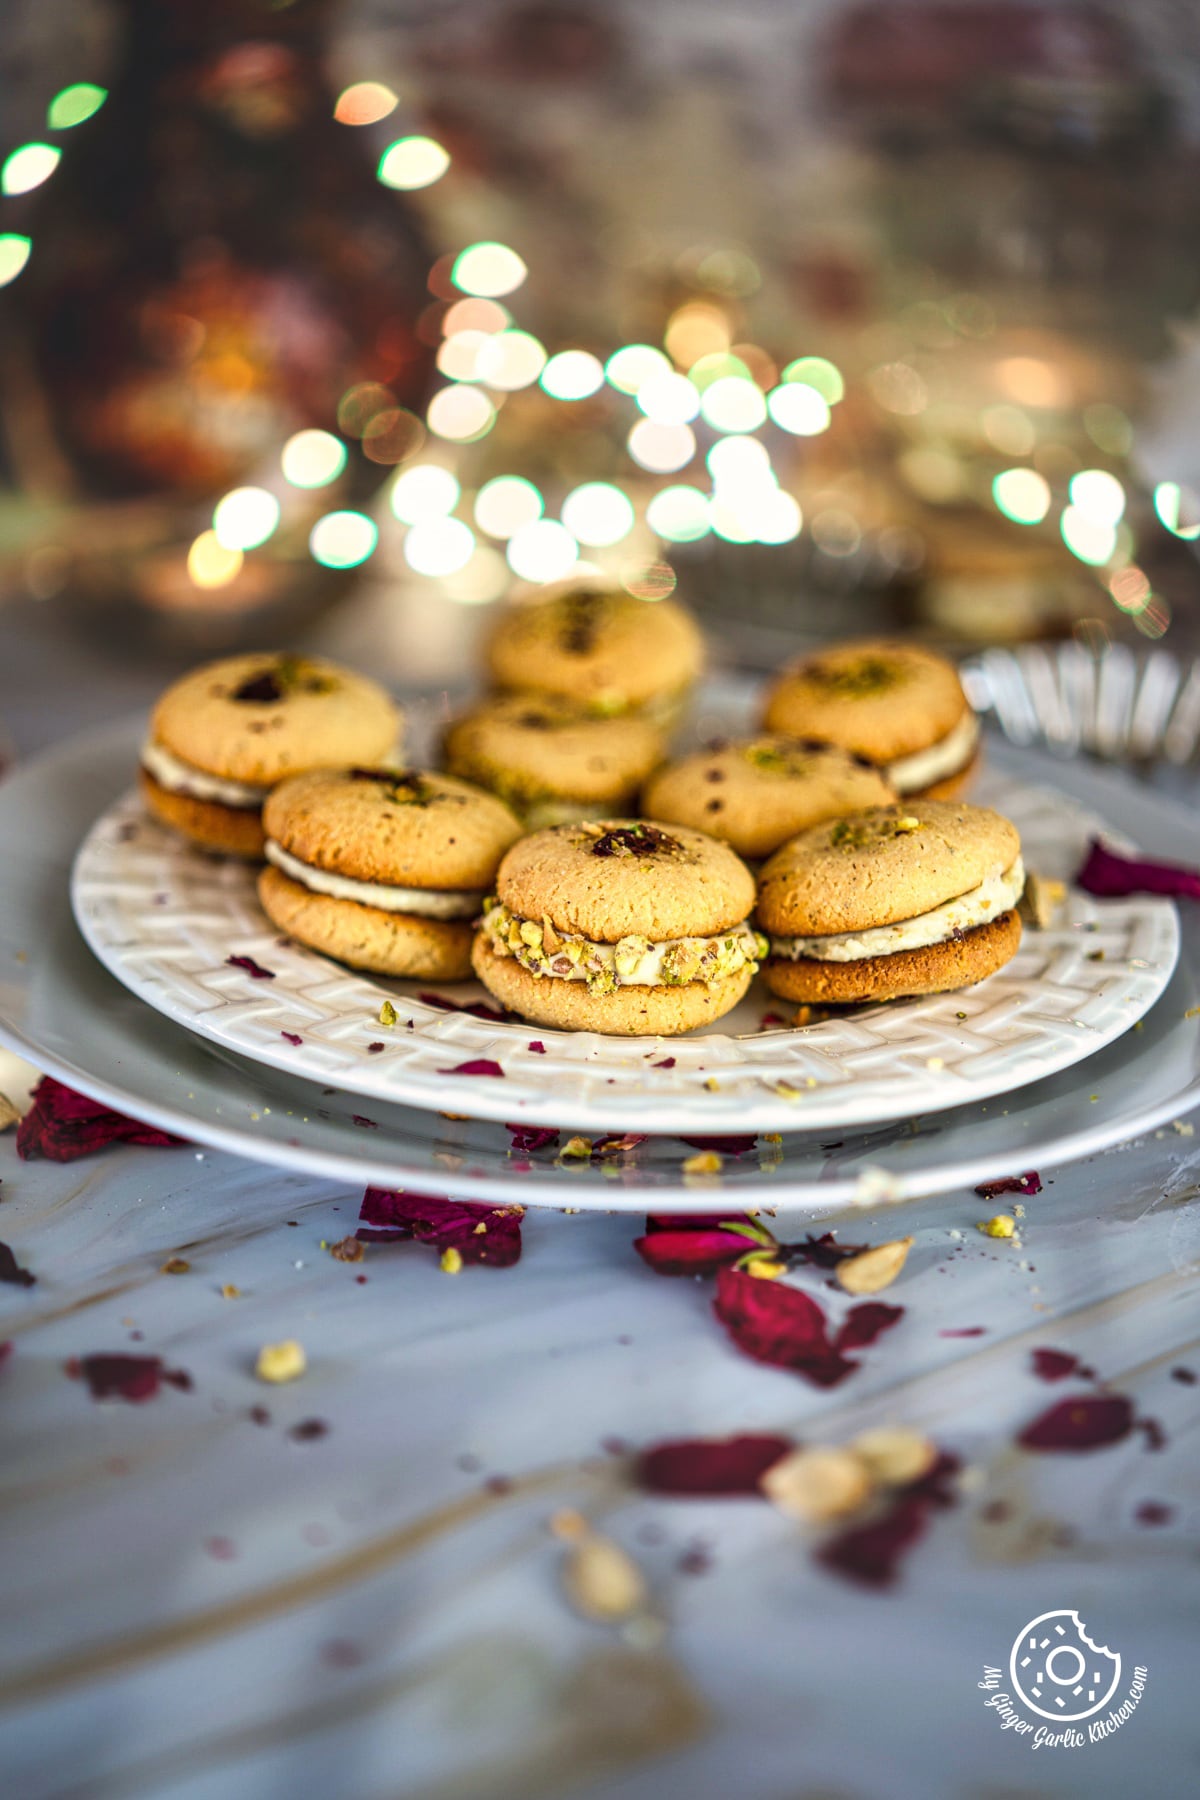 8 gulab jamun cookies served in a in a white plate with some dried rose petals on the side and bouquet light in the background